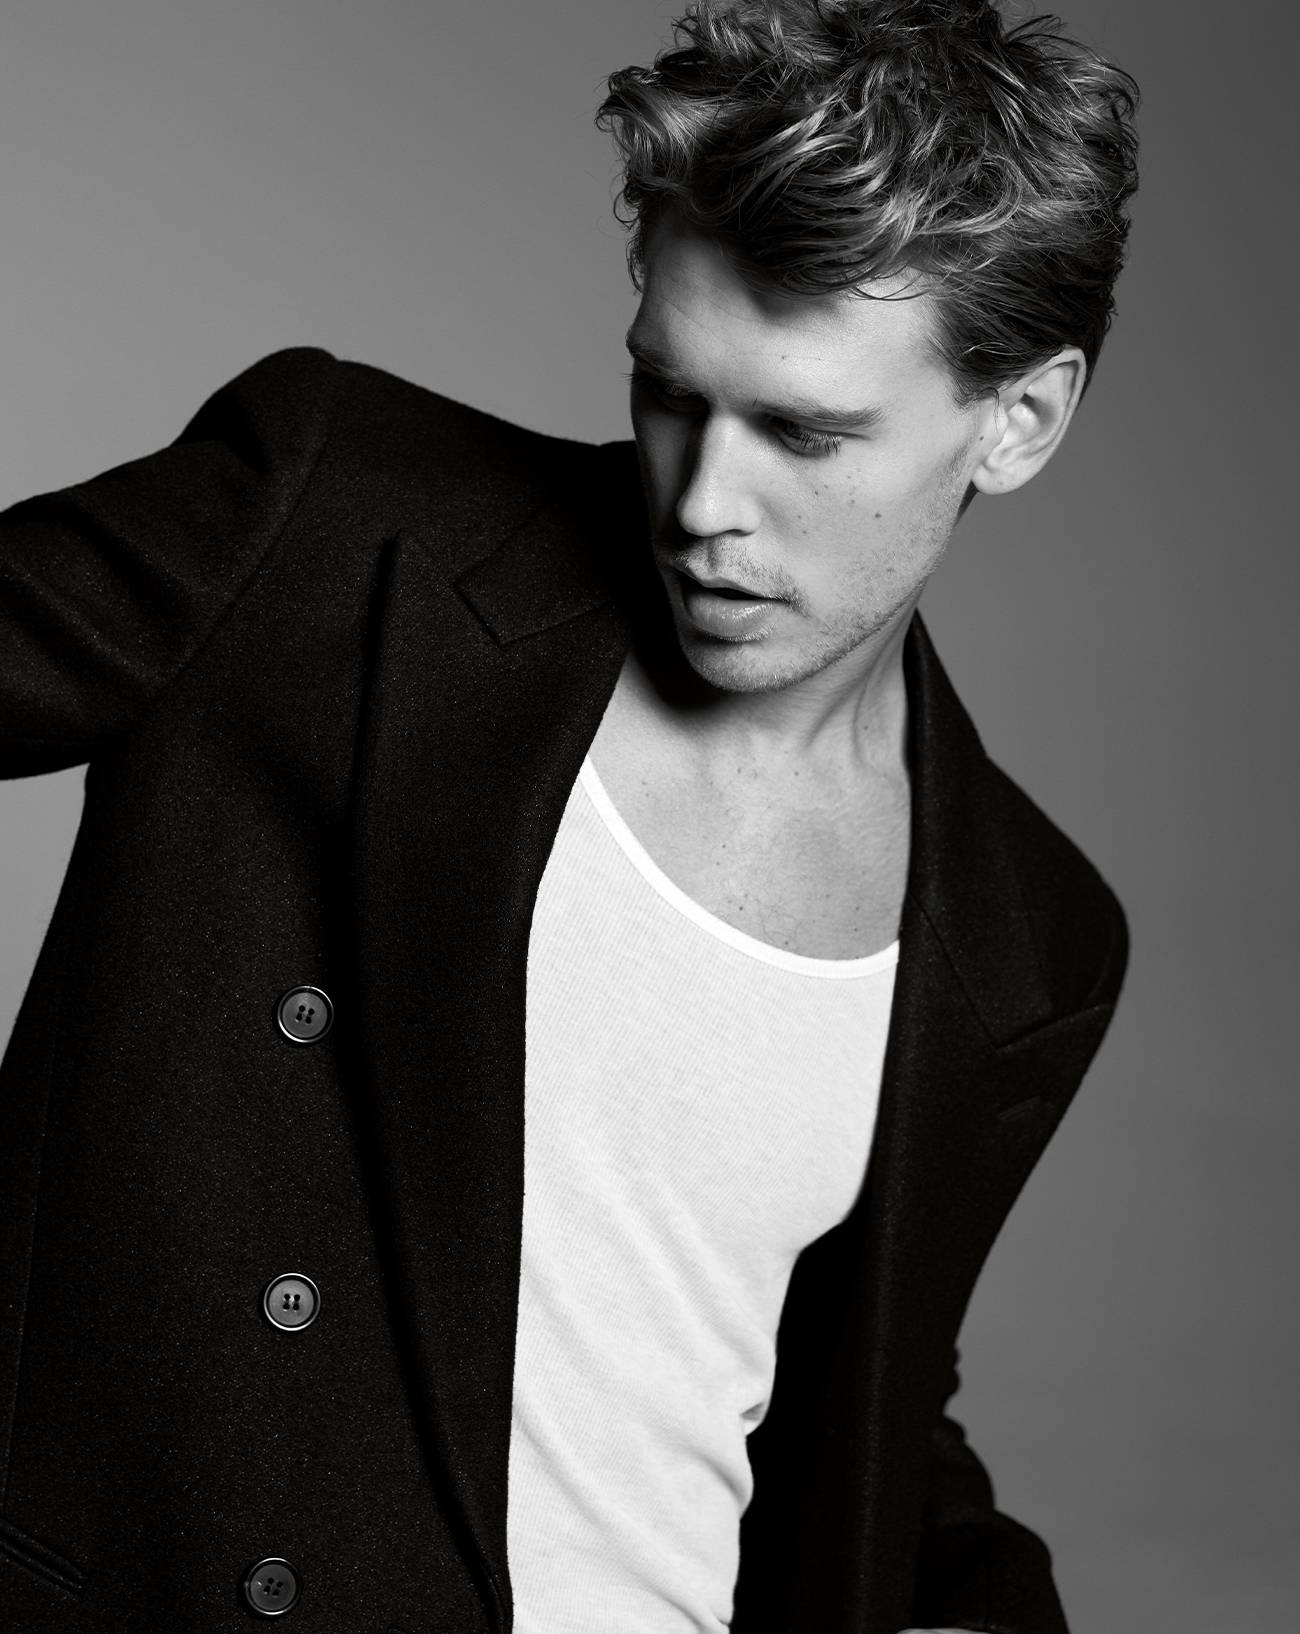 Interview with Austin Butler : "I want a role to frighten me"